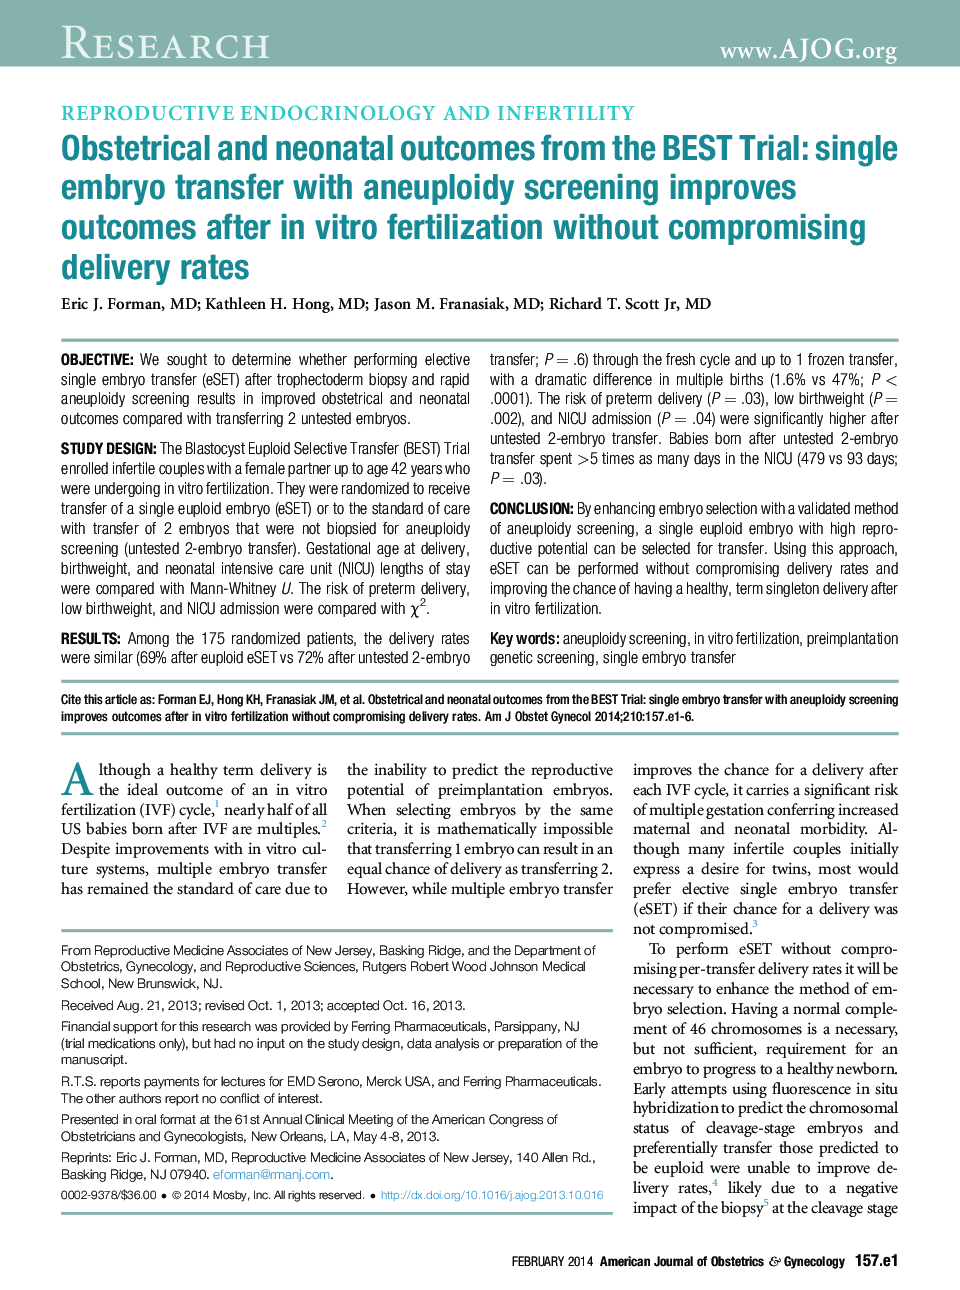 Obstetrical and neonatal outcomes from the BEST Trial: single embryo transfer with aneuploidy screening improves outcomes after inÂ vitro fertilization without compromising delivery rates